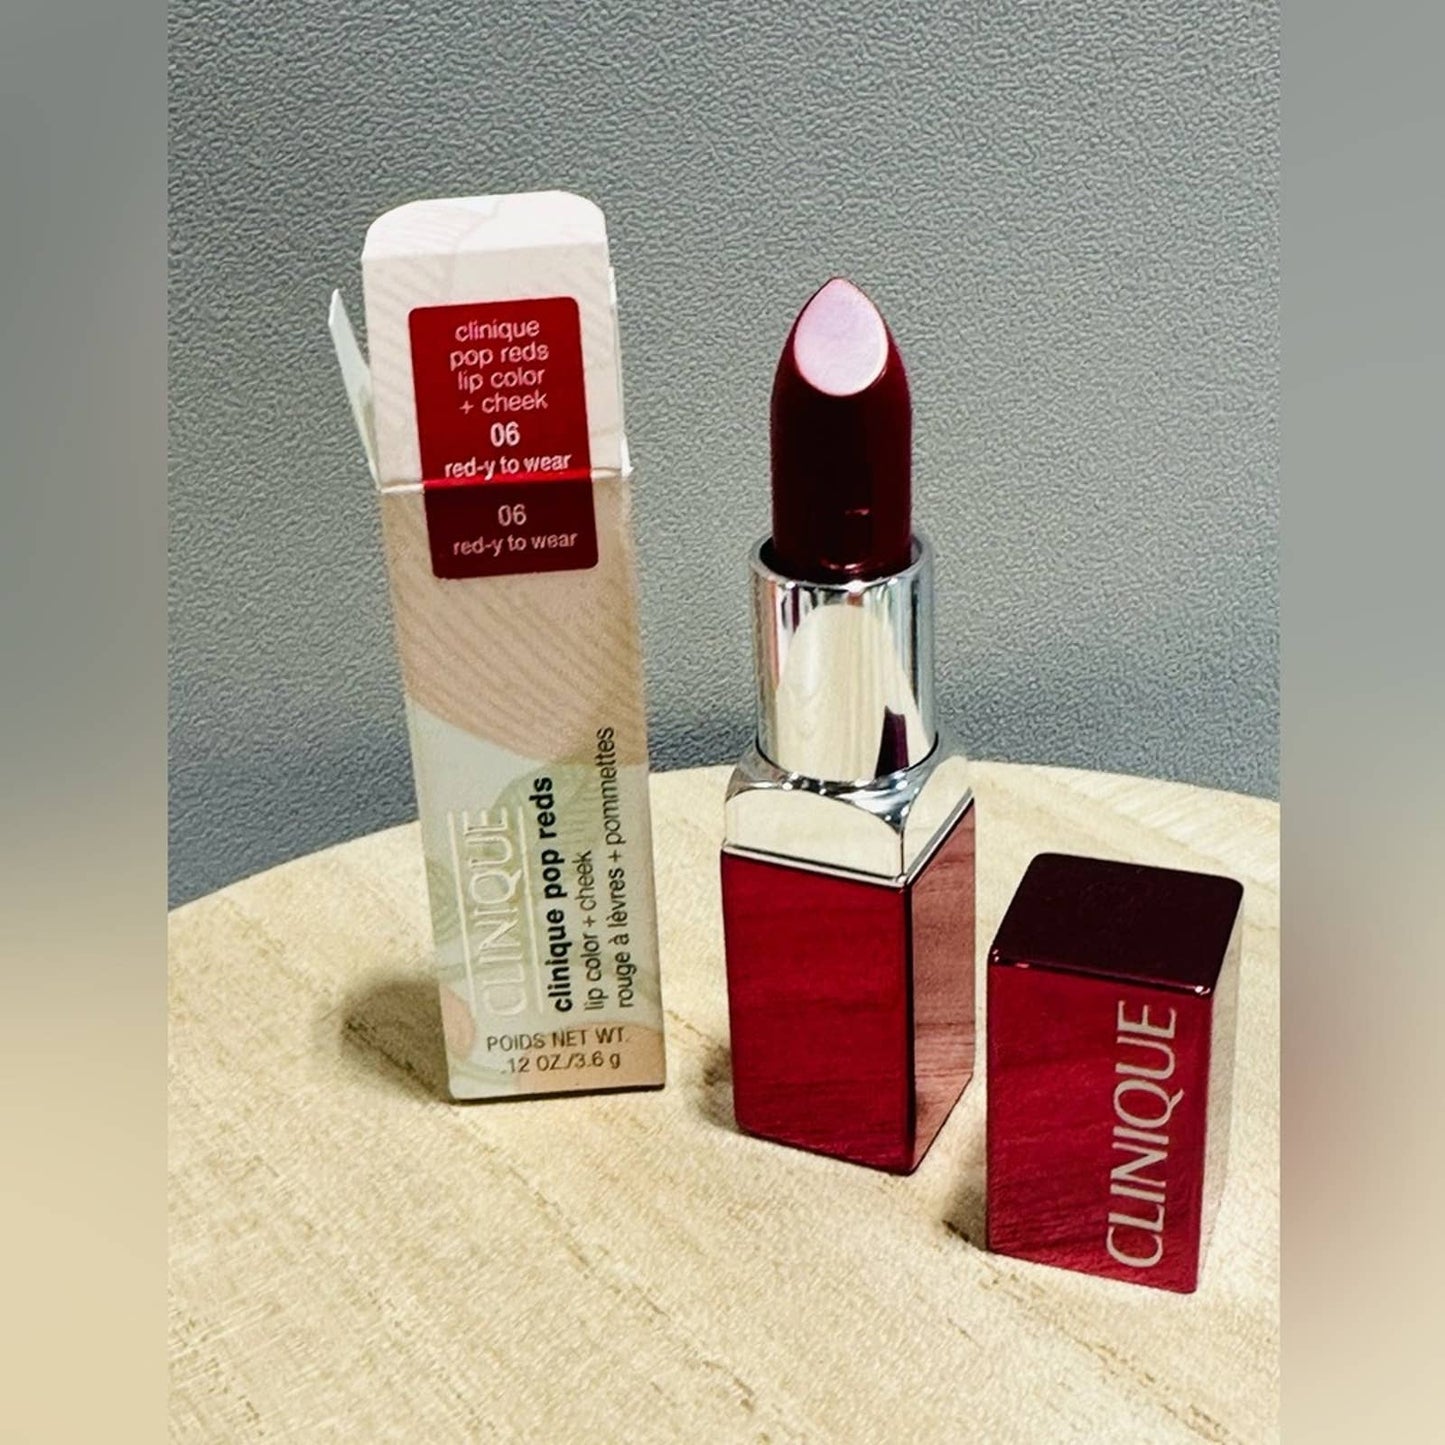 Clinique Lipstick CLEARANCE! Pop Reds Lip Color + Cheek 06 Red-y to Wear